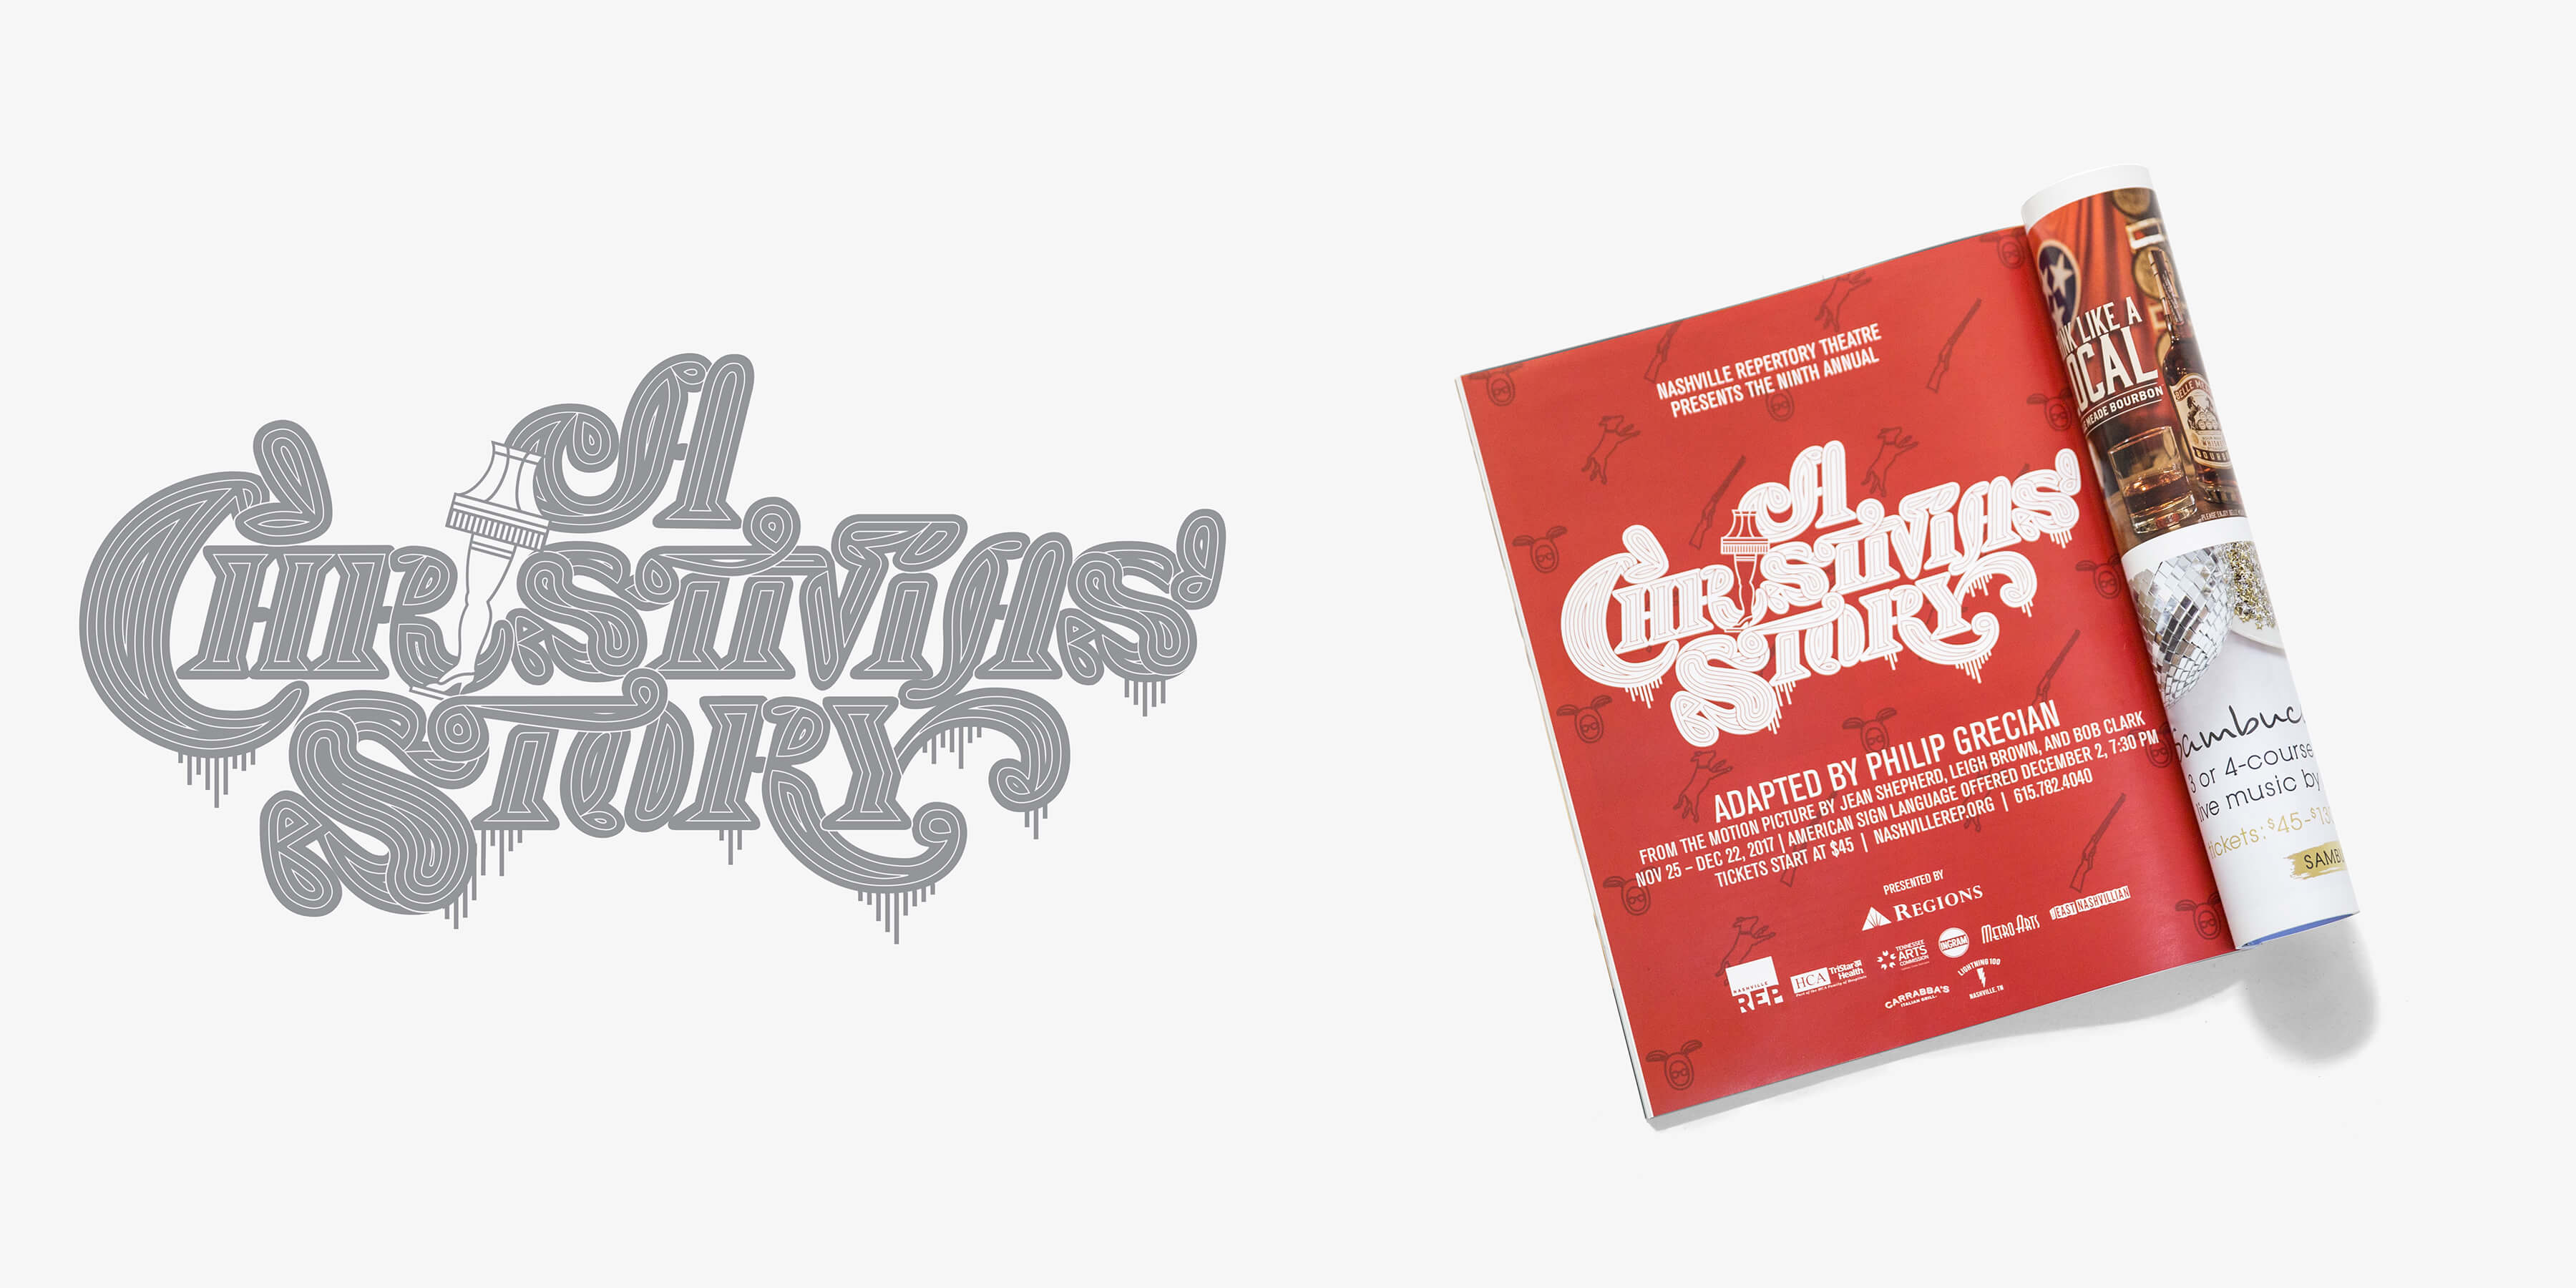 A Christmas Story Title Treatment and Magazine Ad for Nashville Repertory Theatre